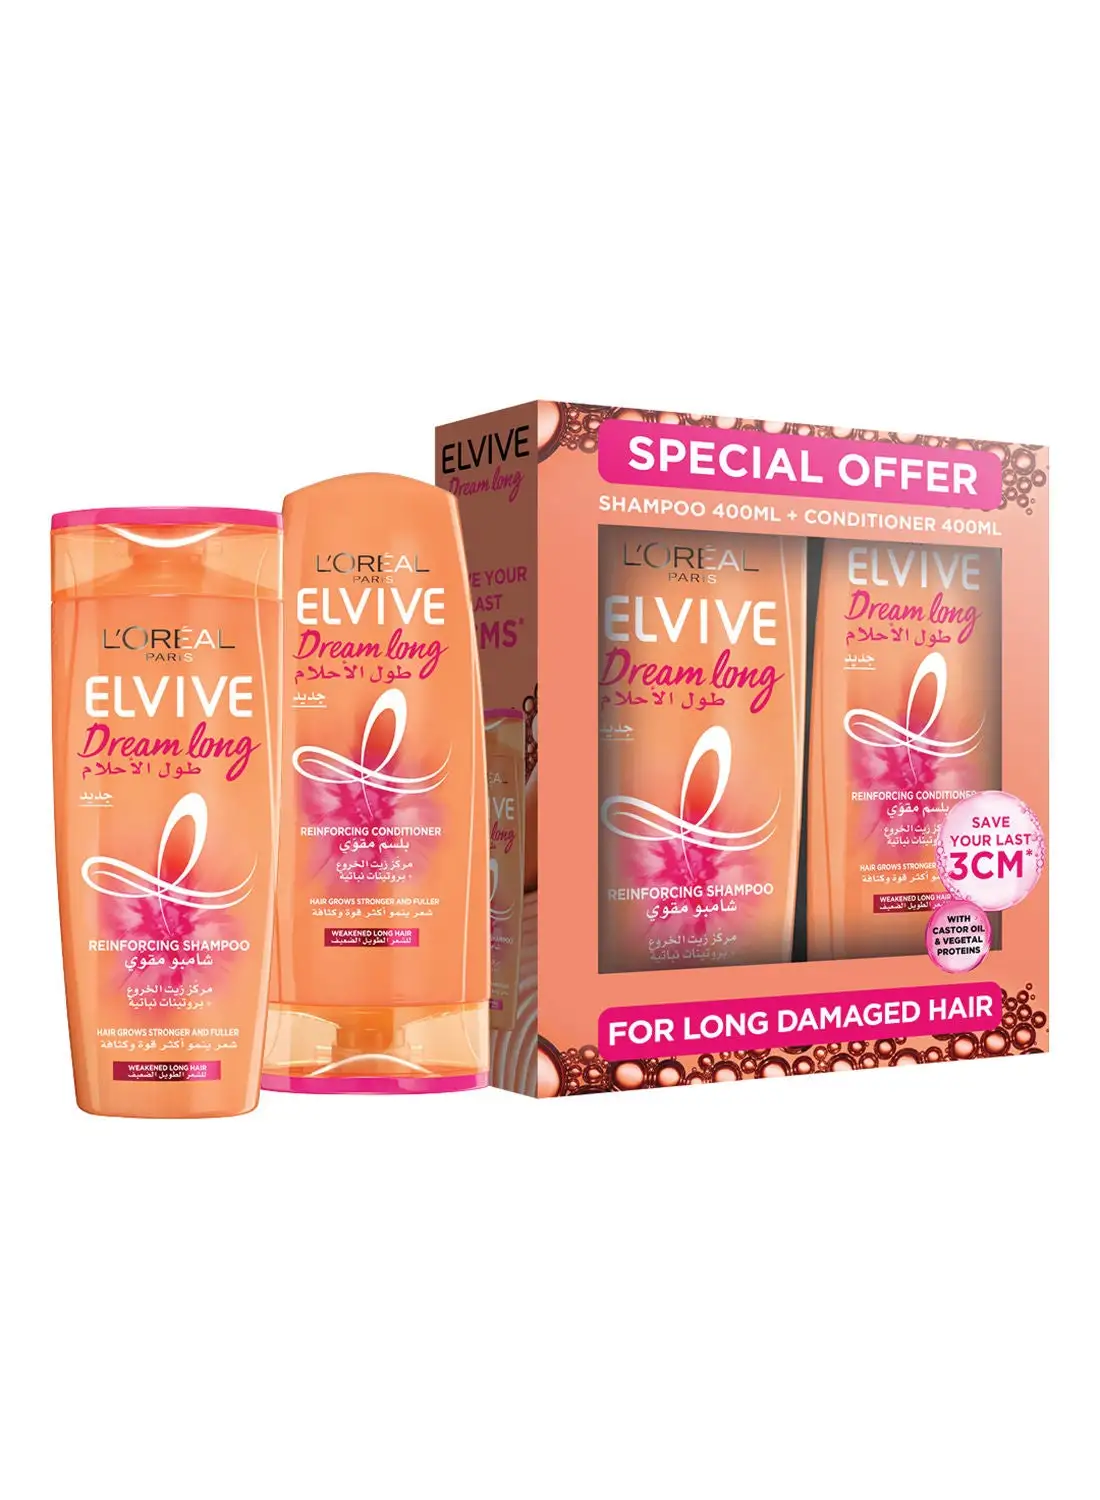 L'OREAL PARIS Elvive Dream Long Shampoo 400ml and Conditioner 400ml Dual Pack